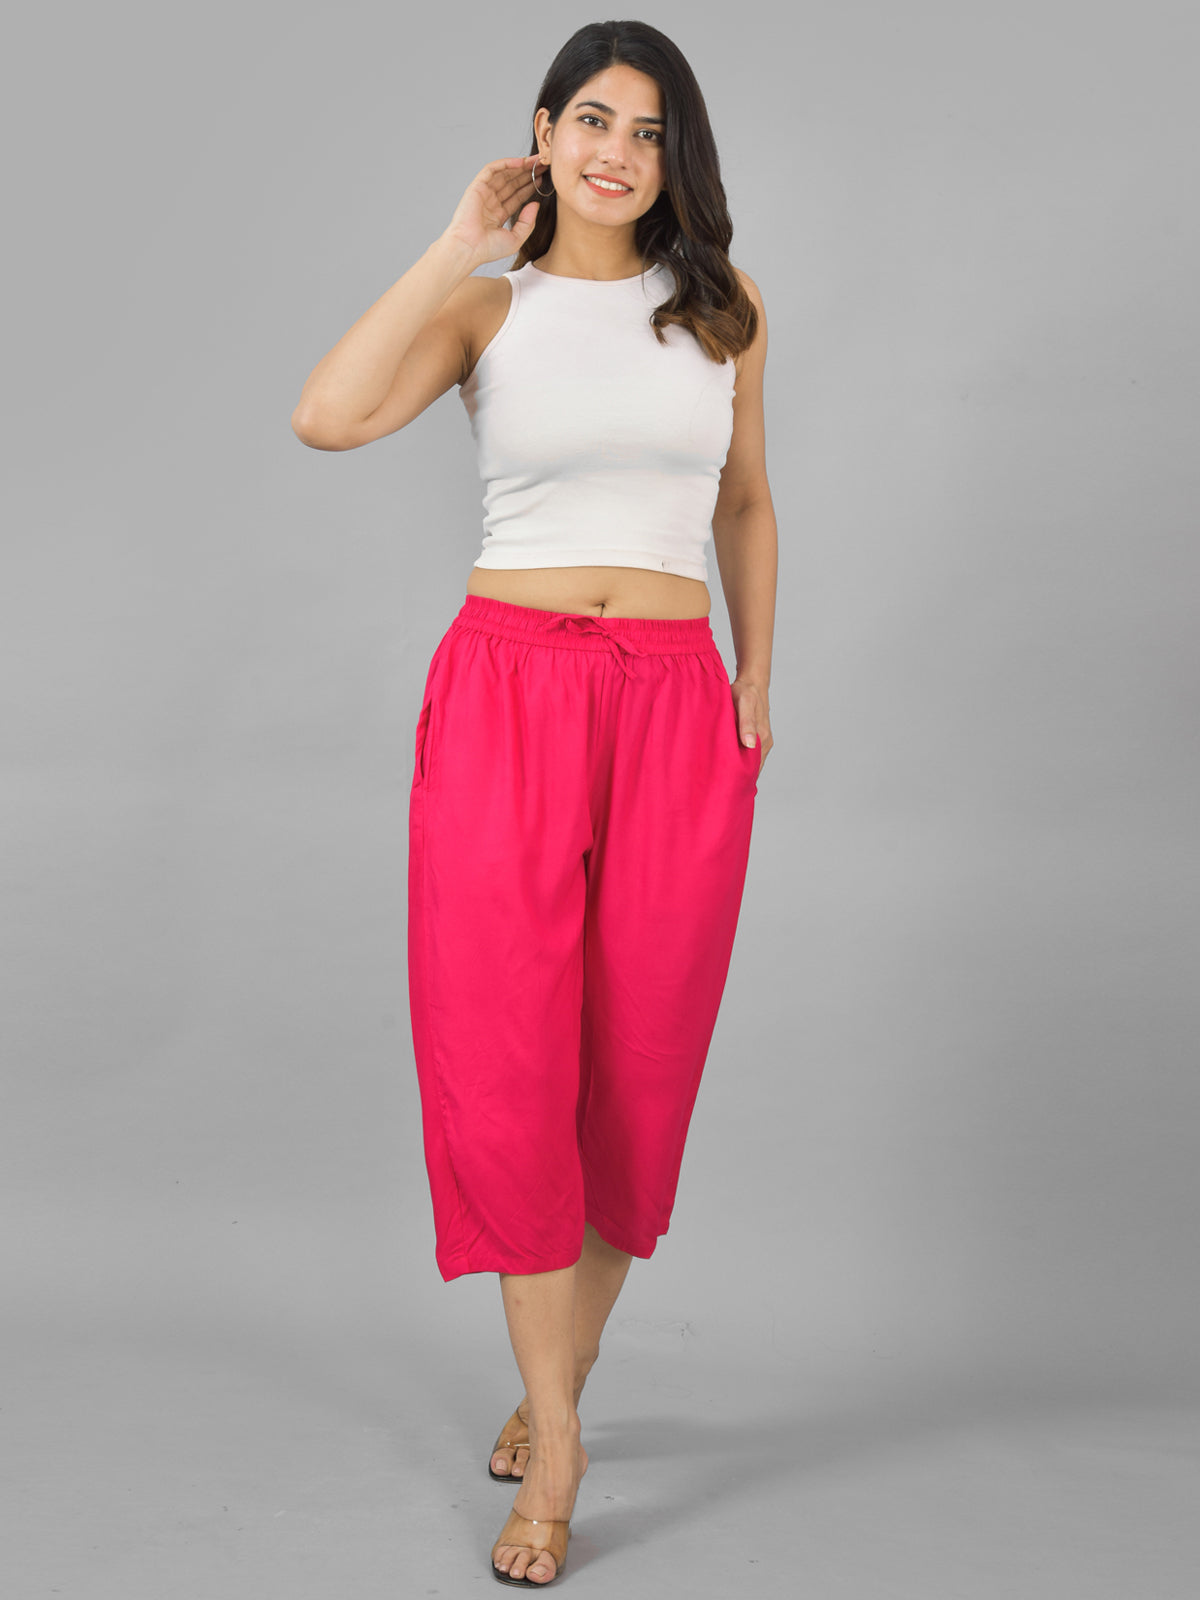 Pack Of 2 Women Rani Pink And Wine Calf Length Rayon Culottes Trouser Combo